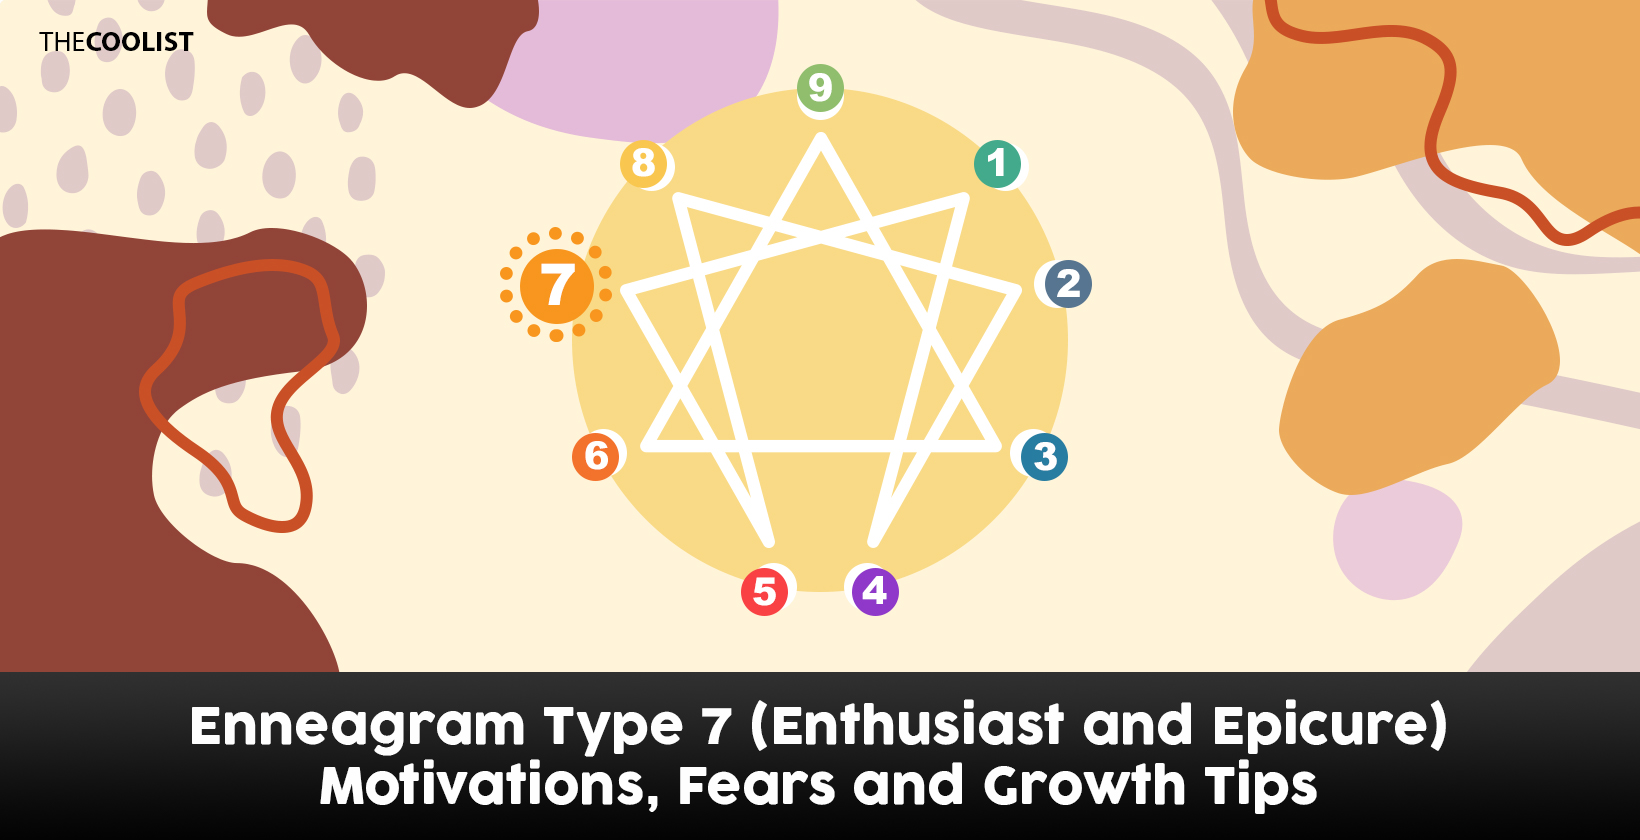 Enneagram Type 7: The Enthusiast and The Epicurean